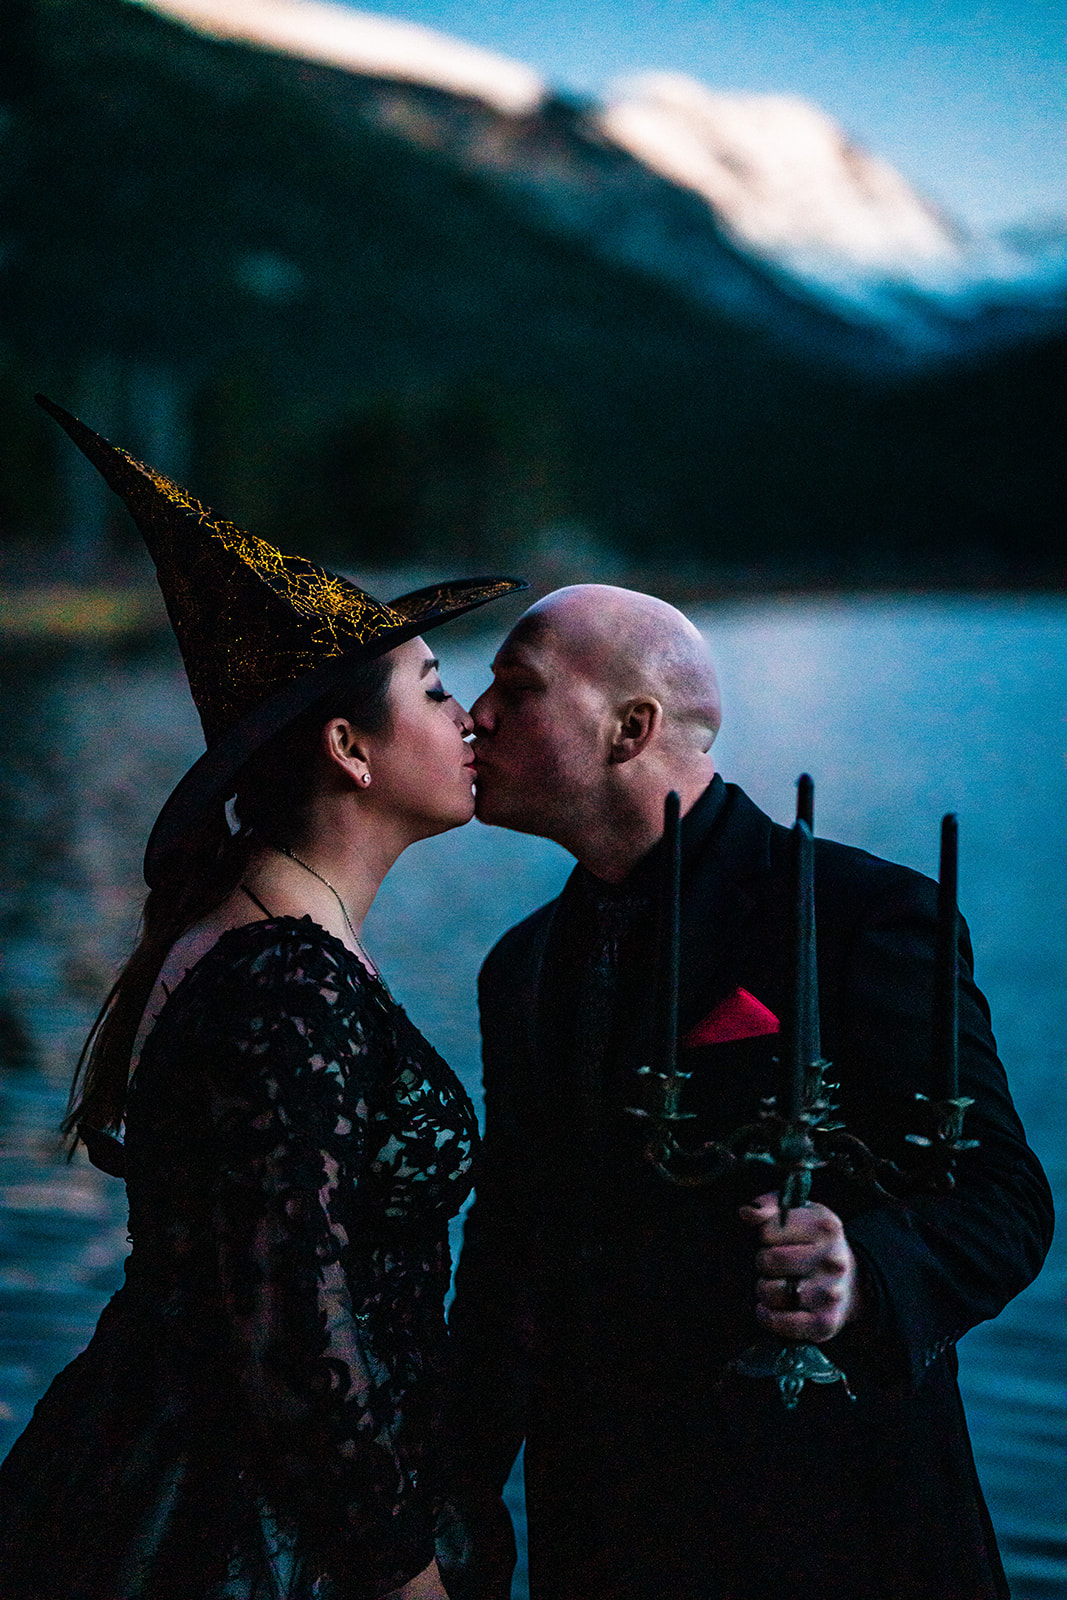 Beautiful bride and groom in spooky attire, a witches hat and holding a candlelabra